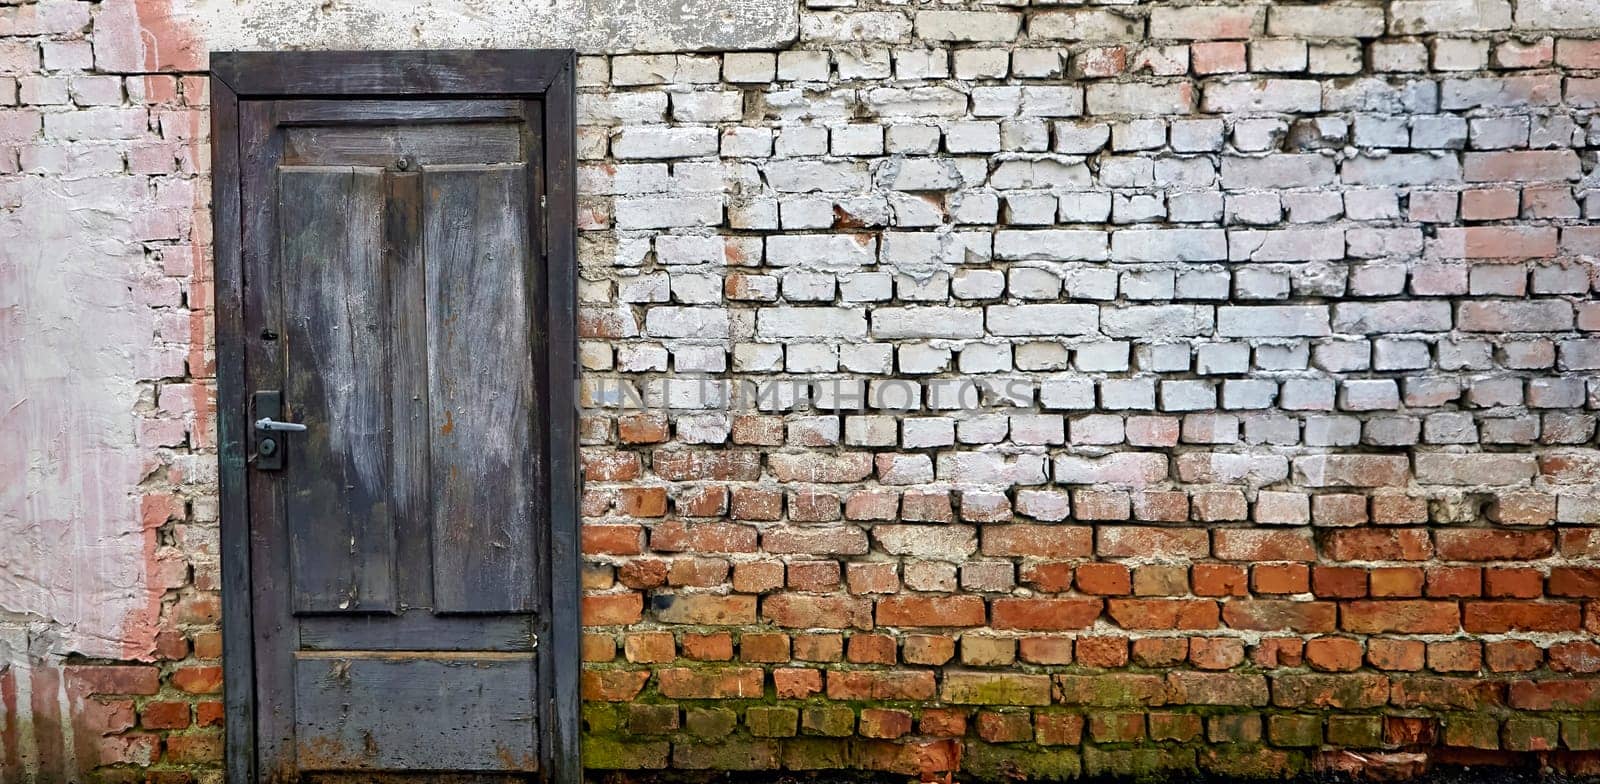 Rustic brick wall featuring a weathered blue wooden door with whitewash remnants by Hil